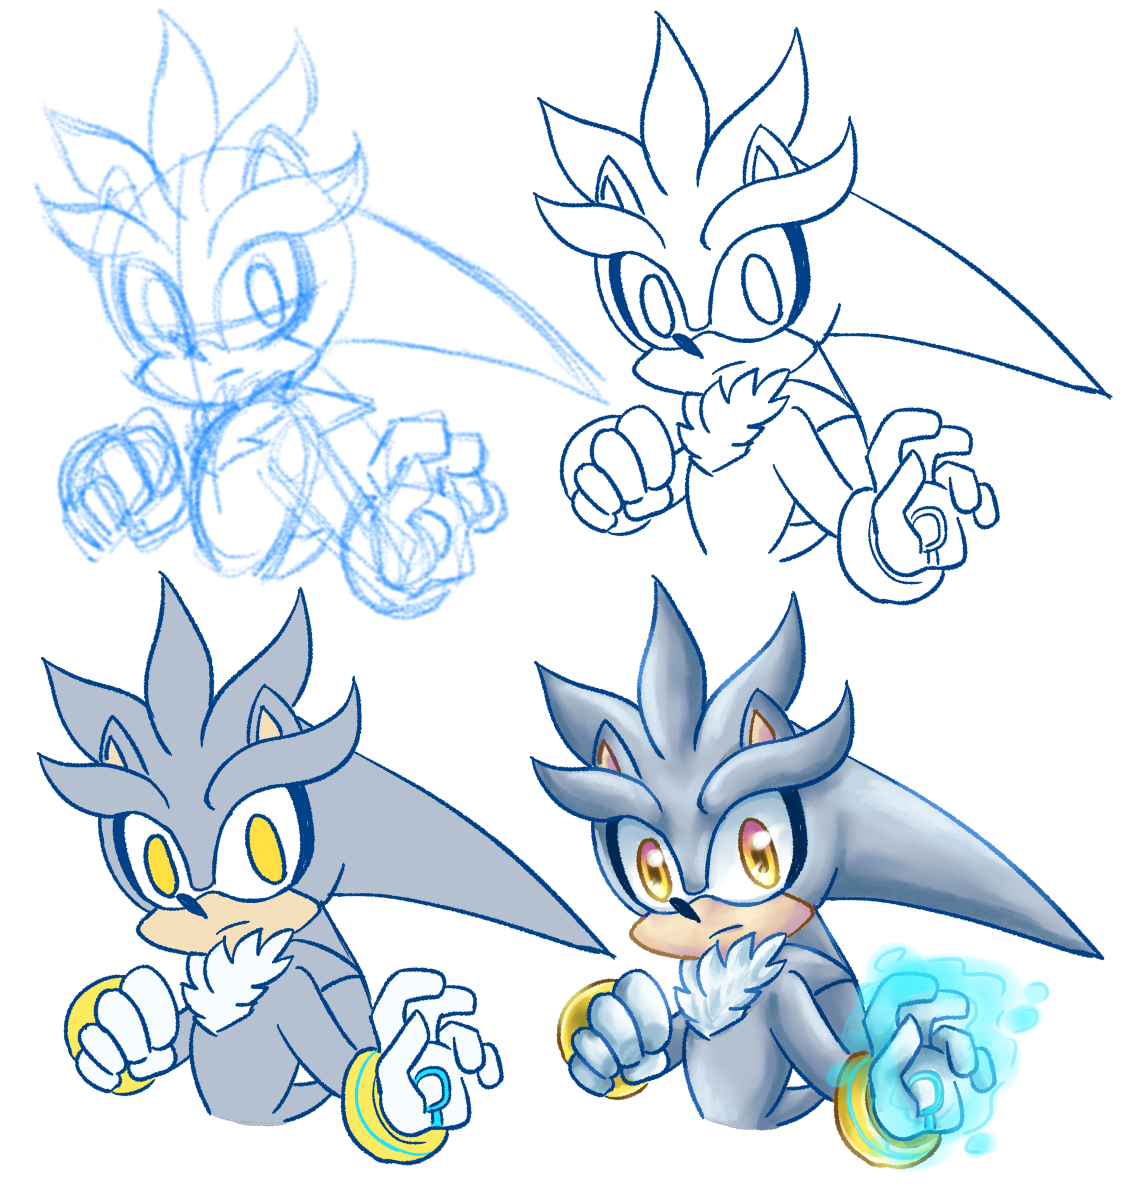 in the context of this art thread, ''silver'' will refer primarily to the hedgehog and not the pokemon trainer